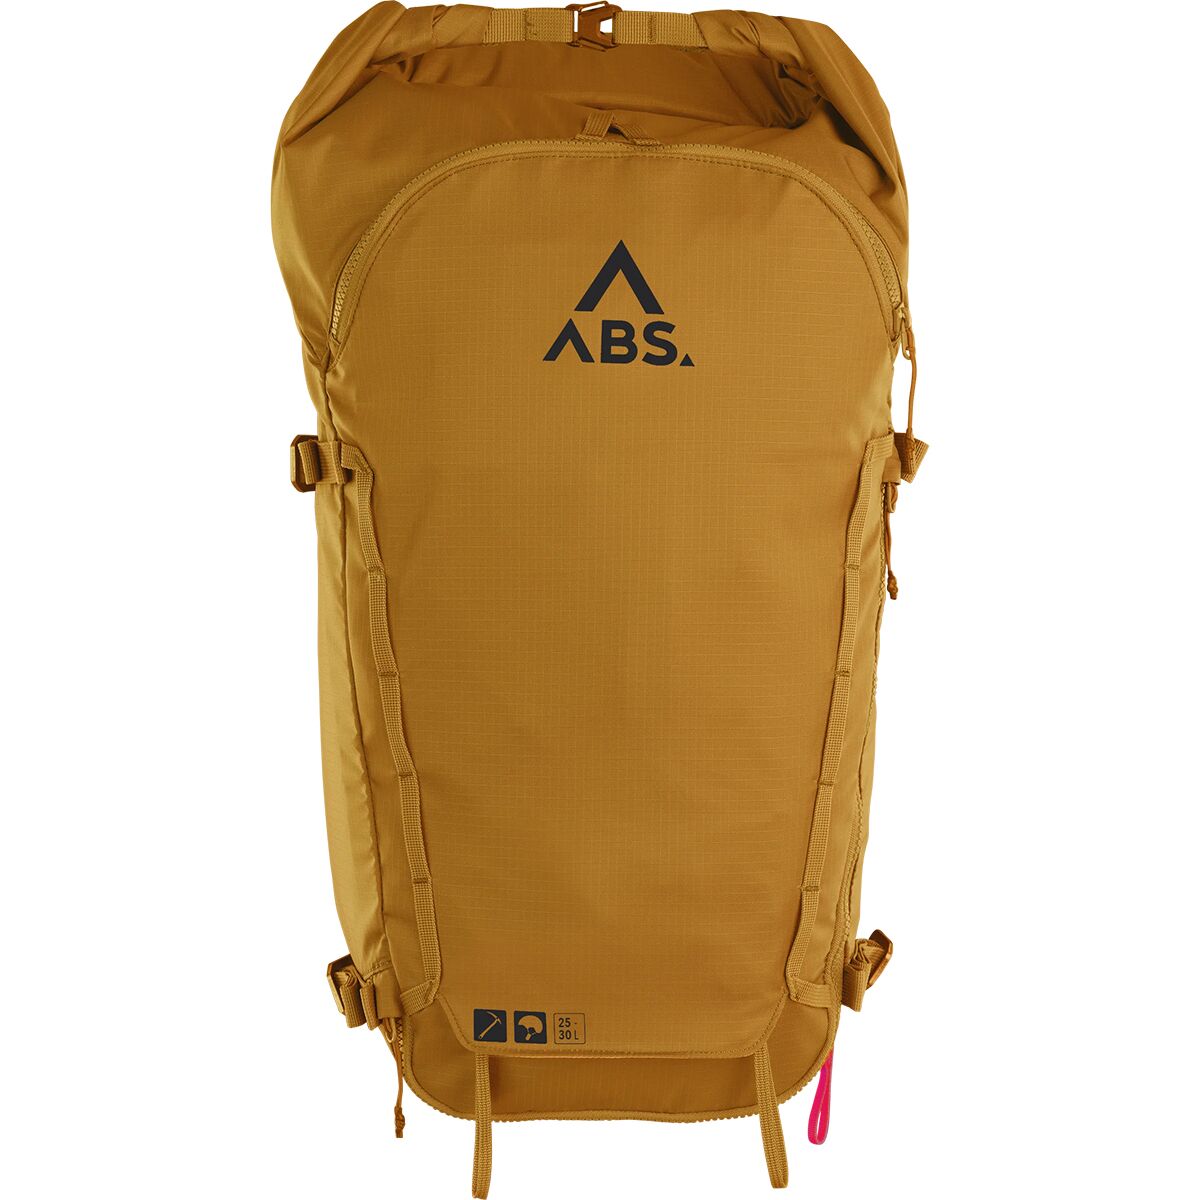 ABS Avalanche Rescue Devices A.Light Zipon 25-30L Burned Yellow